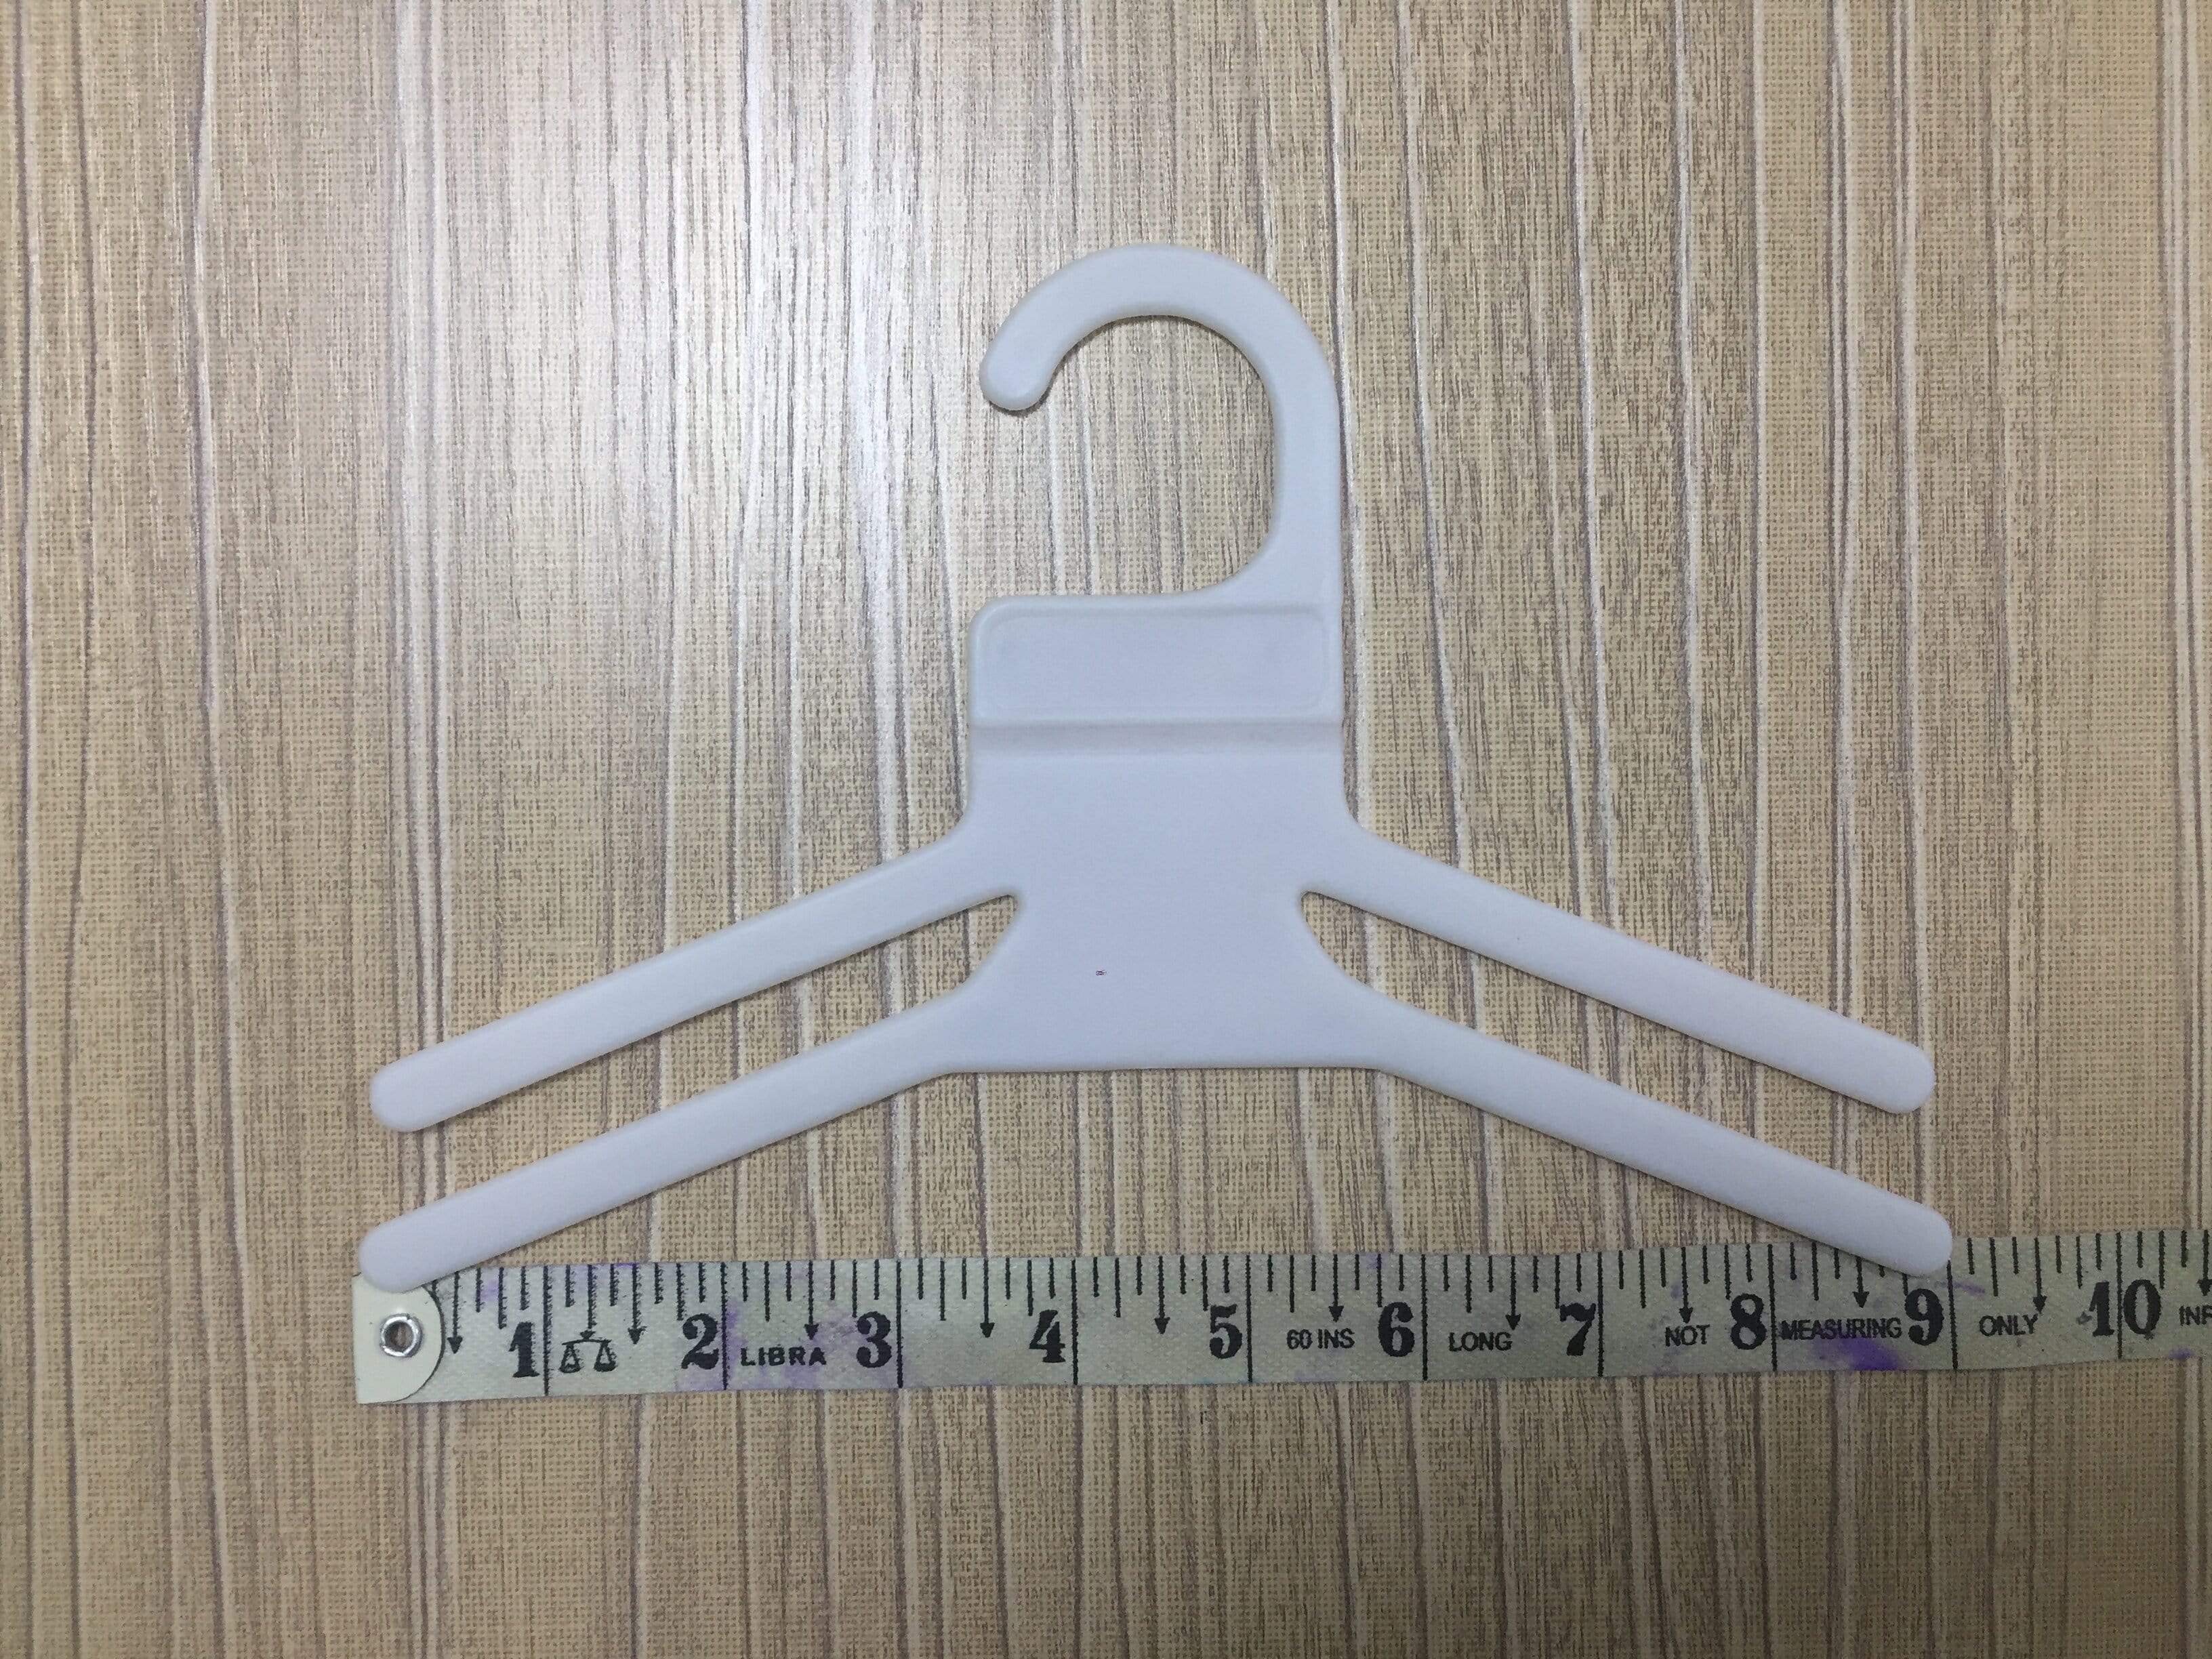 plastic-sleeping-bag-shirt-t-shirt-hangers-manufacturers-and-suppliers-in-india